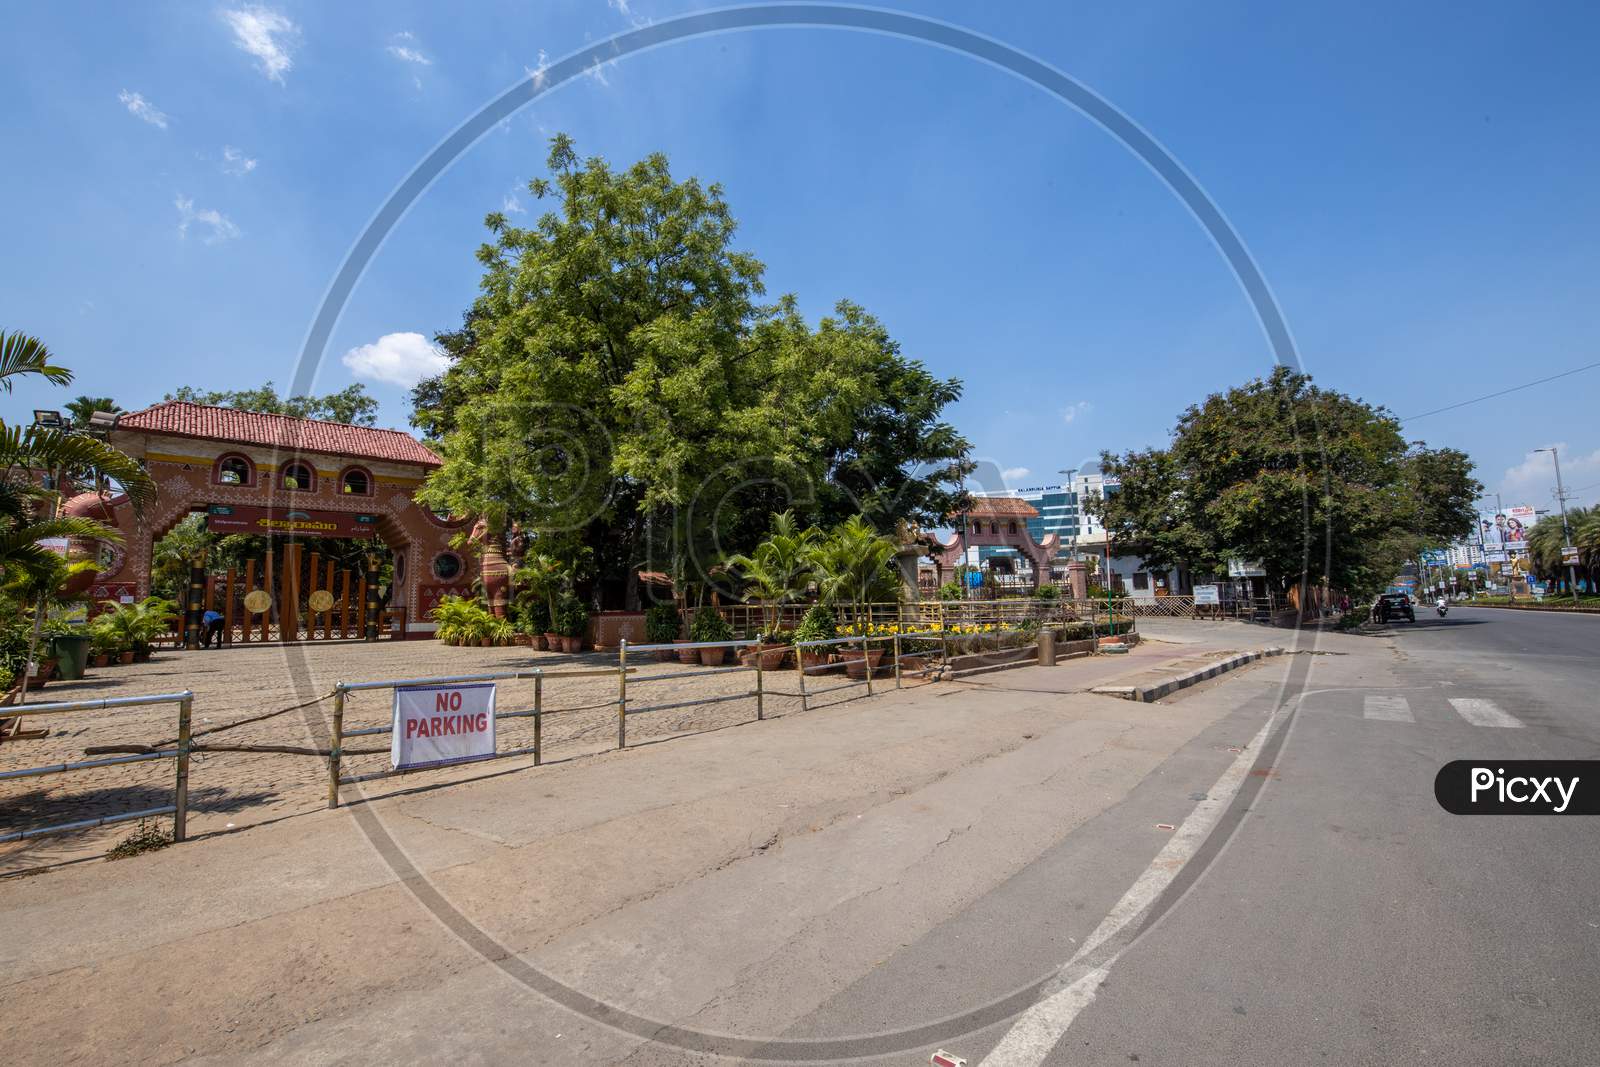 Janata Curfew , Deserted Roads At Shilparamam   in Hyderabad  As Indian Prime Minister Narendra Modi Called For a 14 Hour Janta  Curfew Or Self-imposed  Quarantine To Break The  Highly Contagious  COVID 19 Or Corona Virus Spread